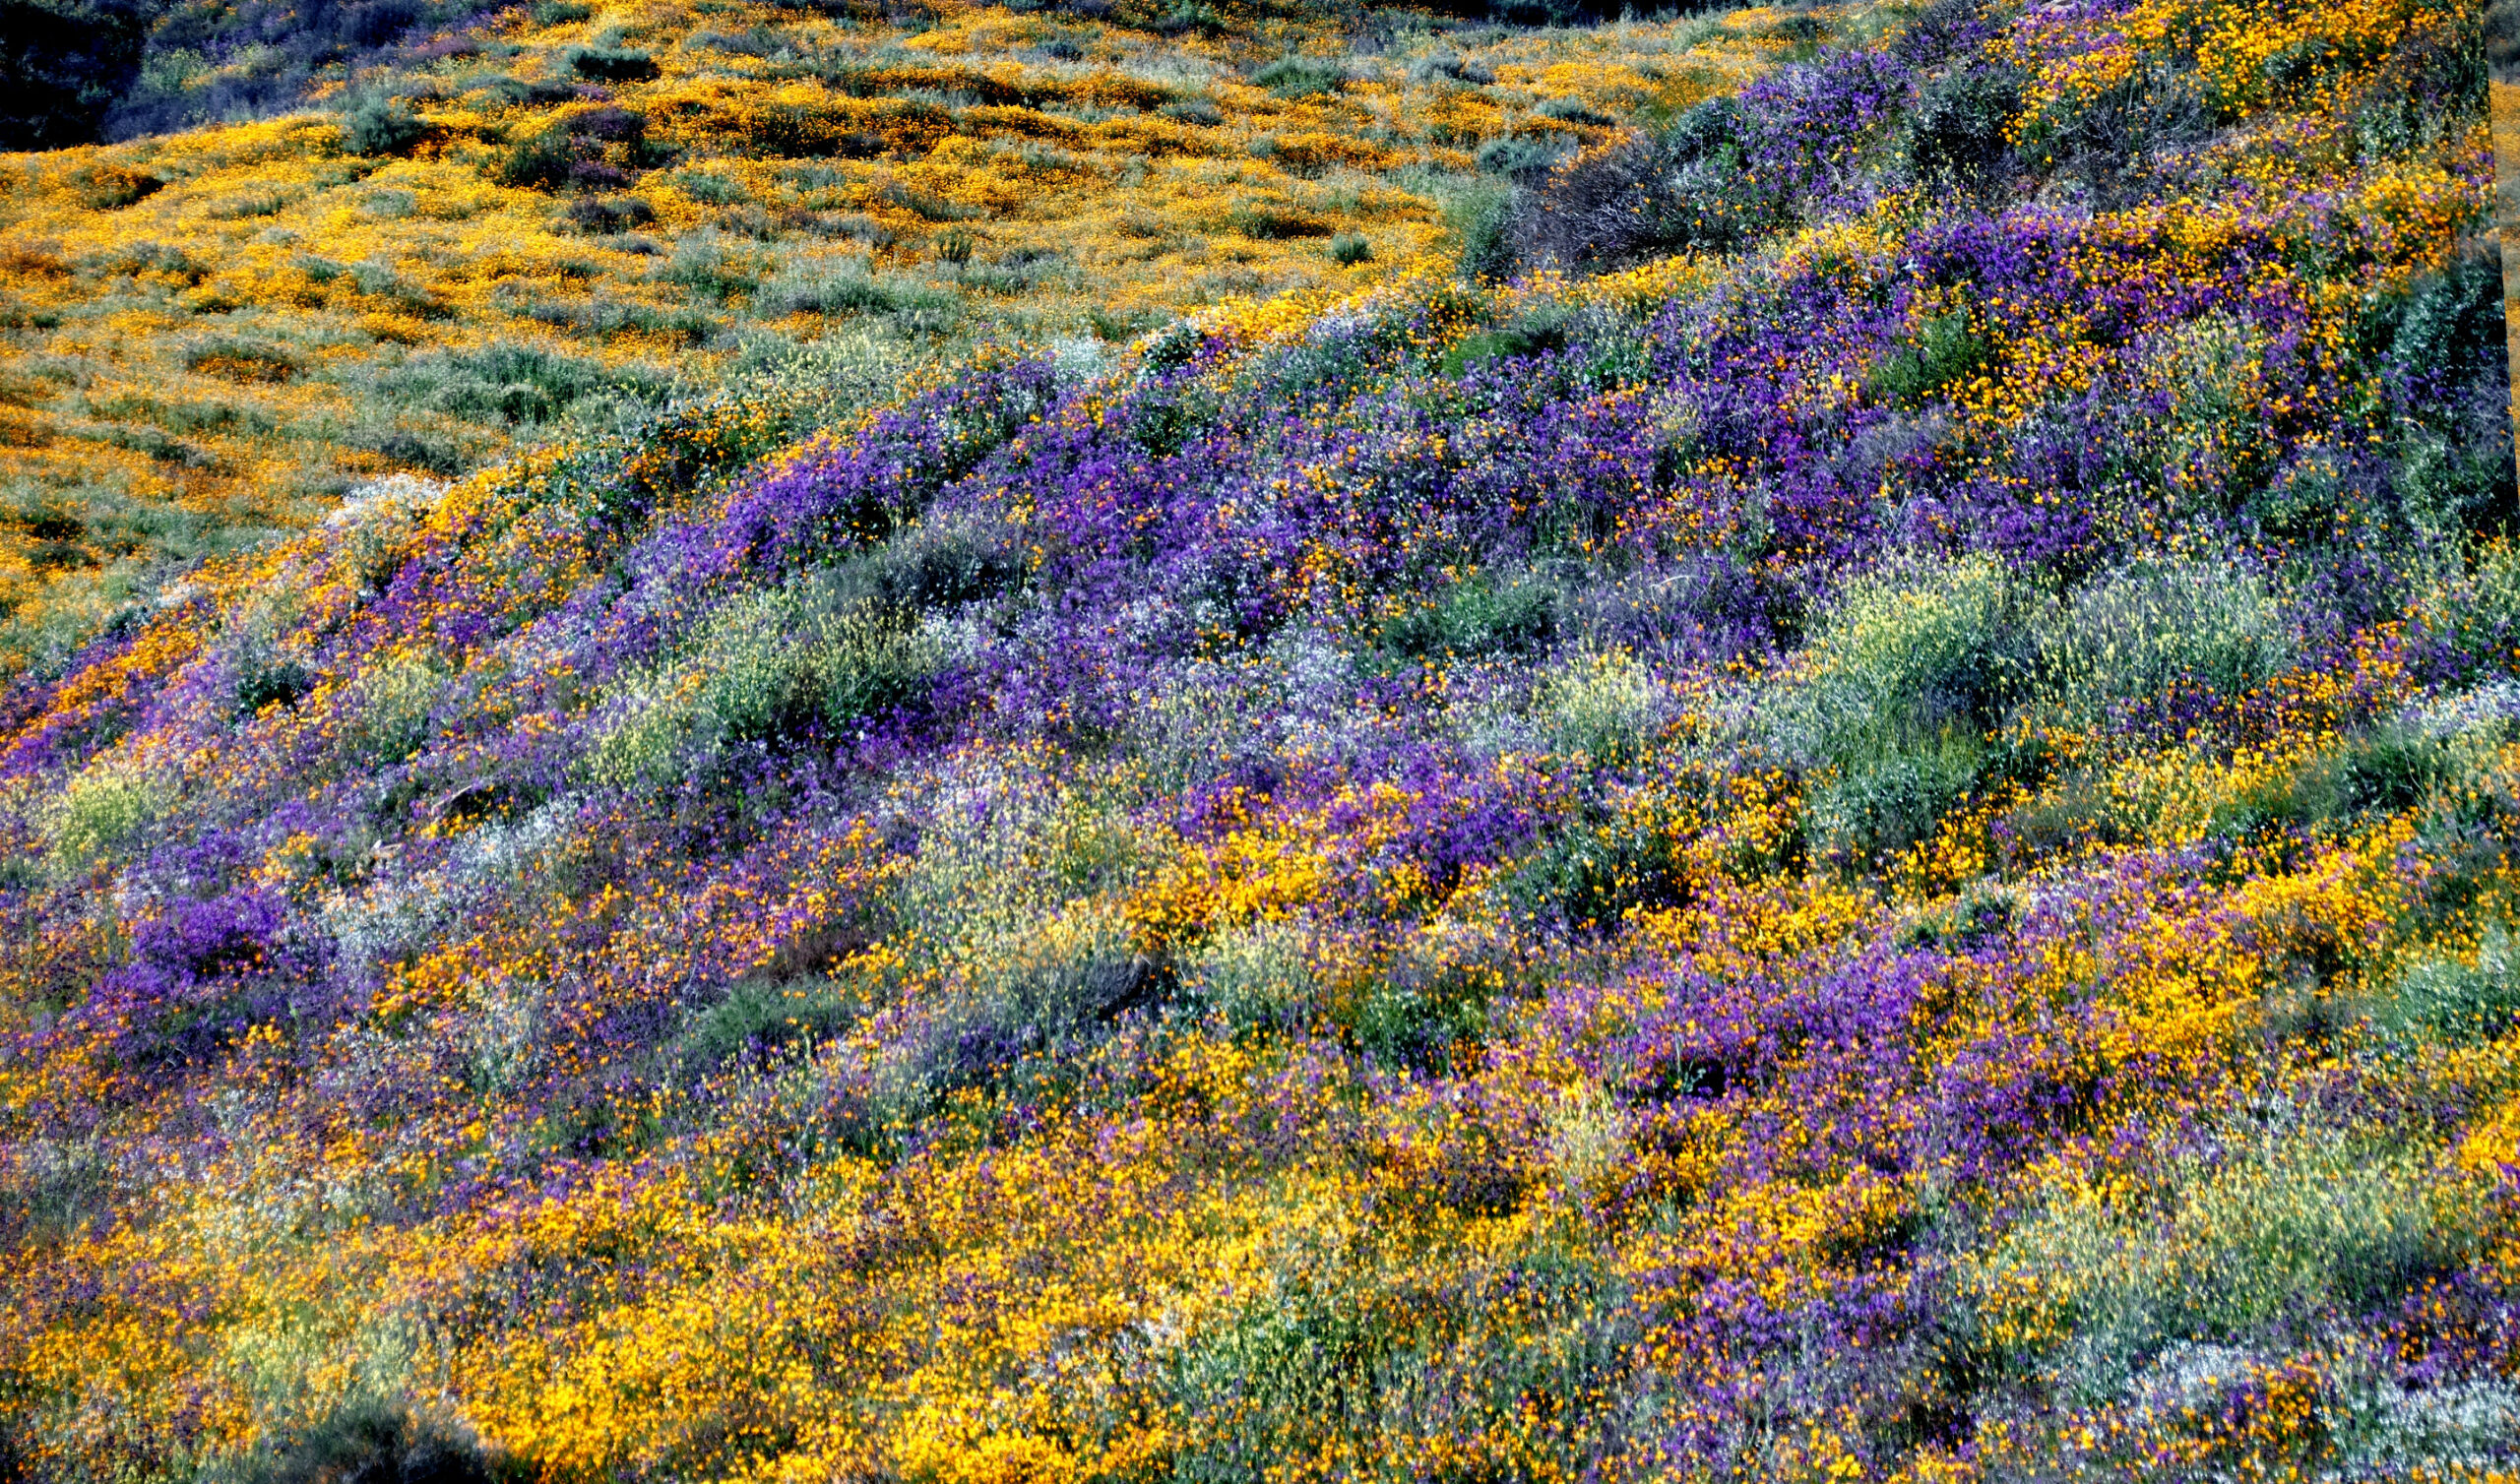 Orange and yellow wildflowers in full bloom at Walker Canyon, California.